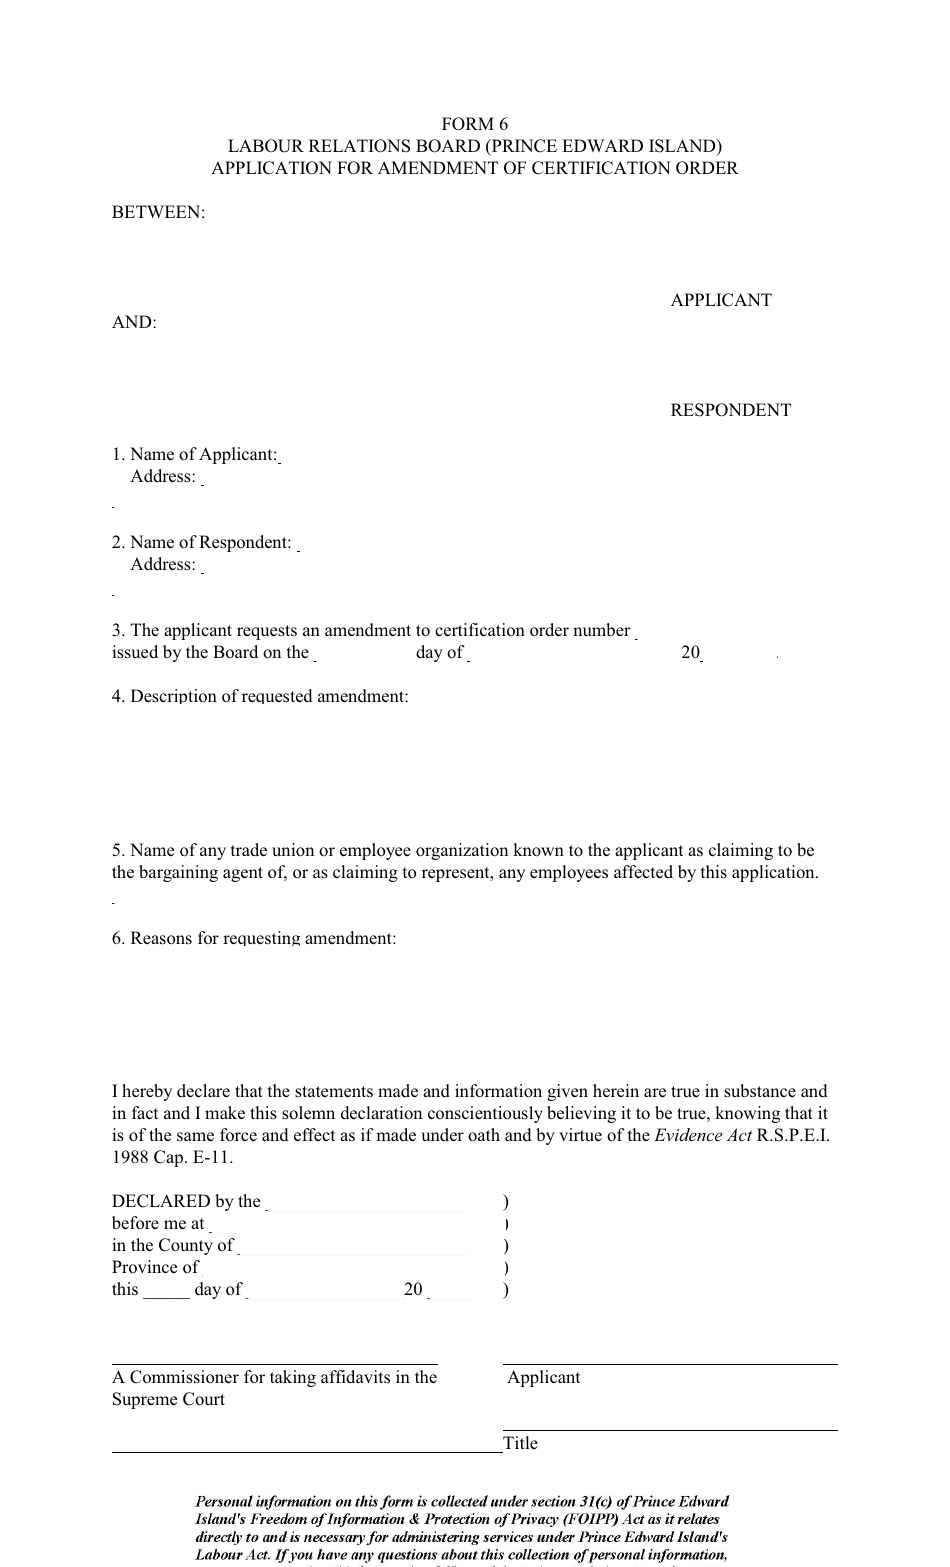 Form 6 Application for Amendment of Certification Order - Prince Edward Island, Canada, Page 1